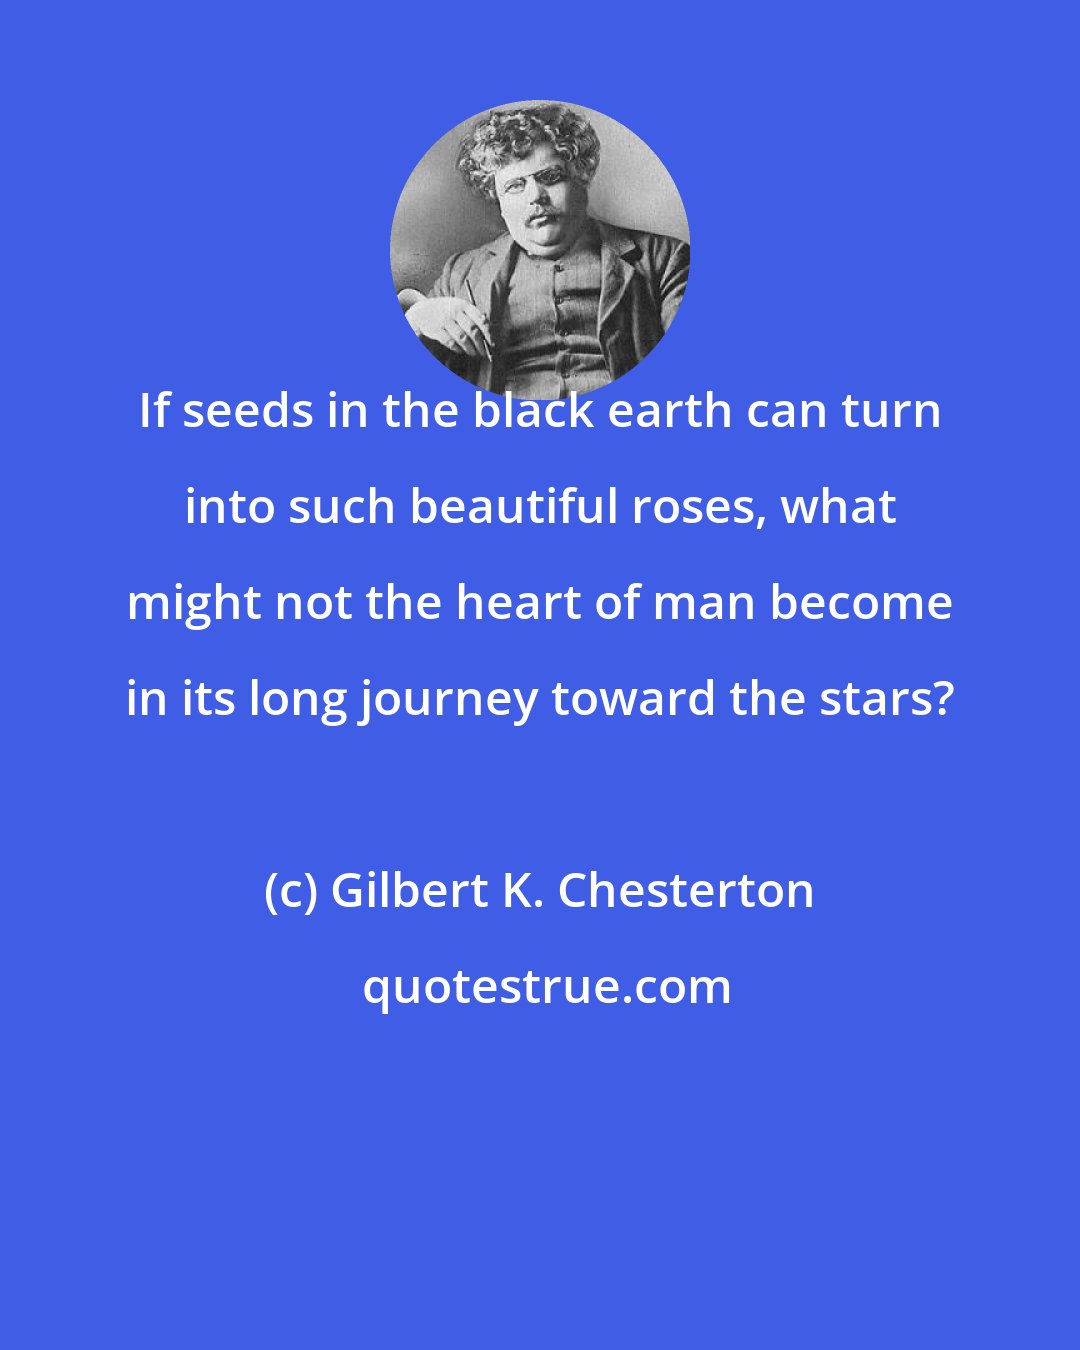 Gilbert K. Chesterton: If seeds in the black earth can turn into such beautiful roses, what might not the heart of man become in its long journey toward the stars?